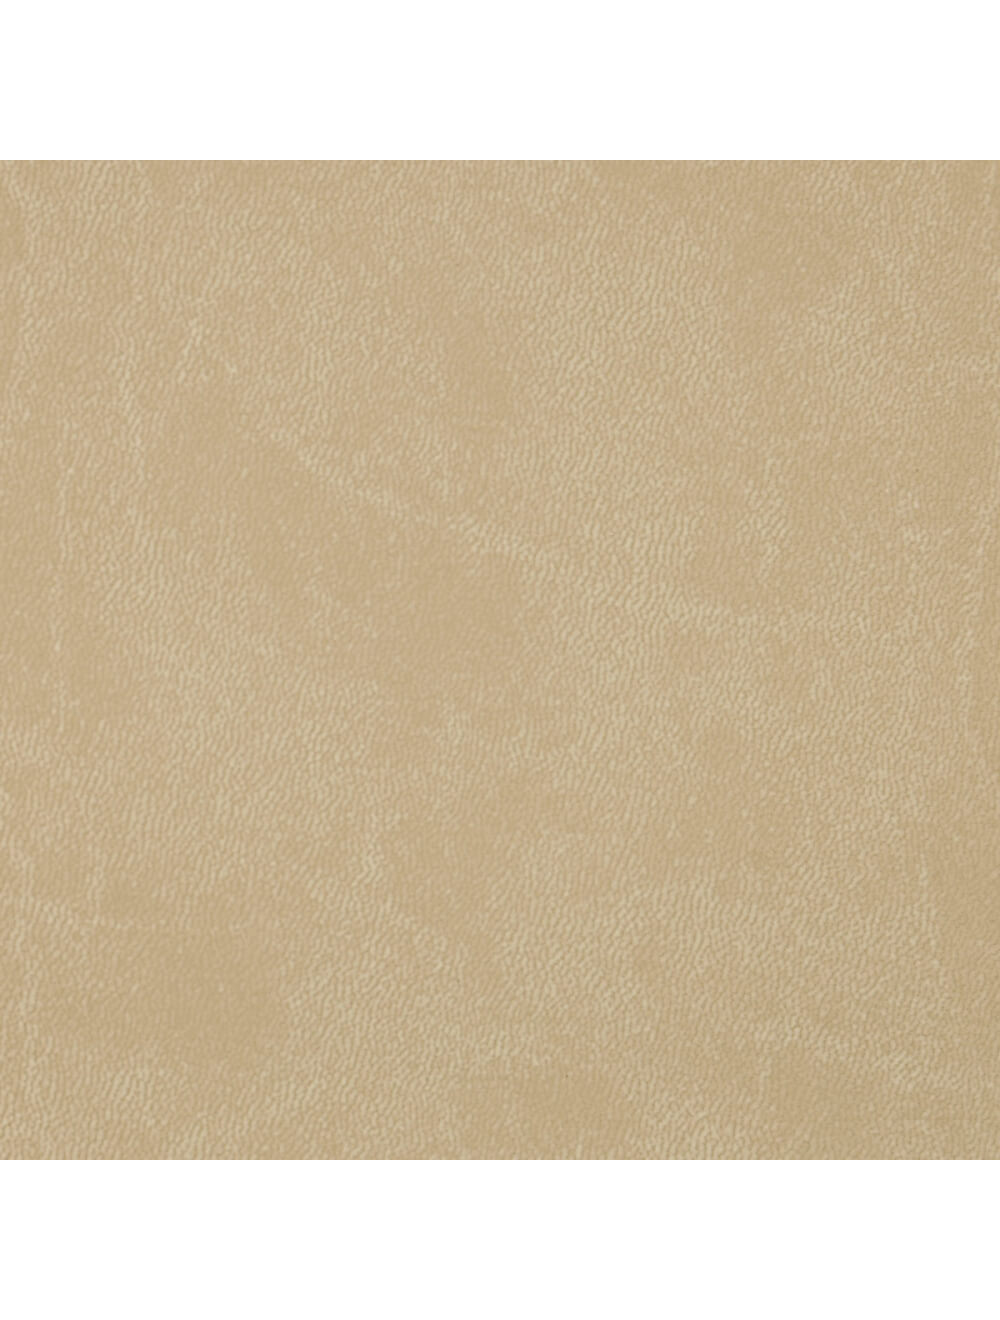 Rome Sand Material Swatch (A788-3253)